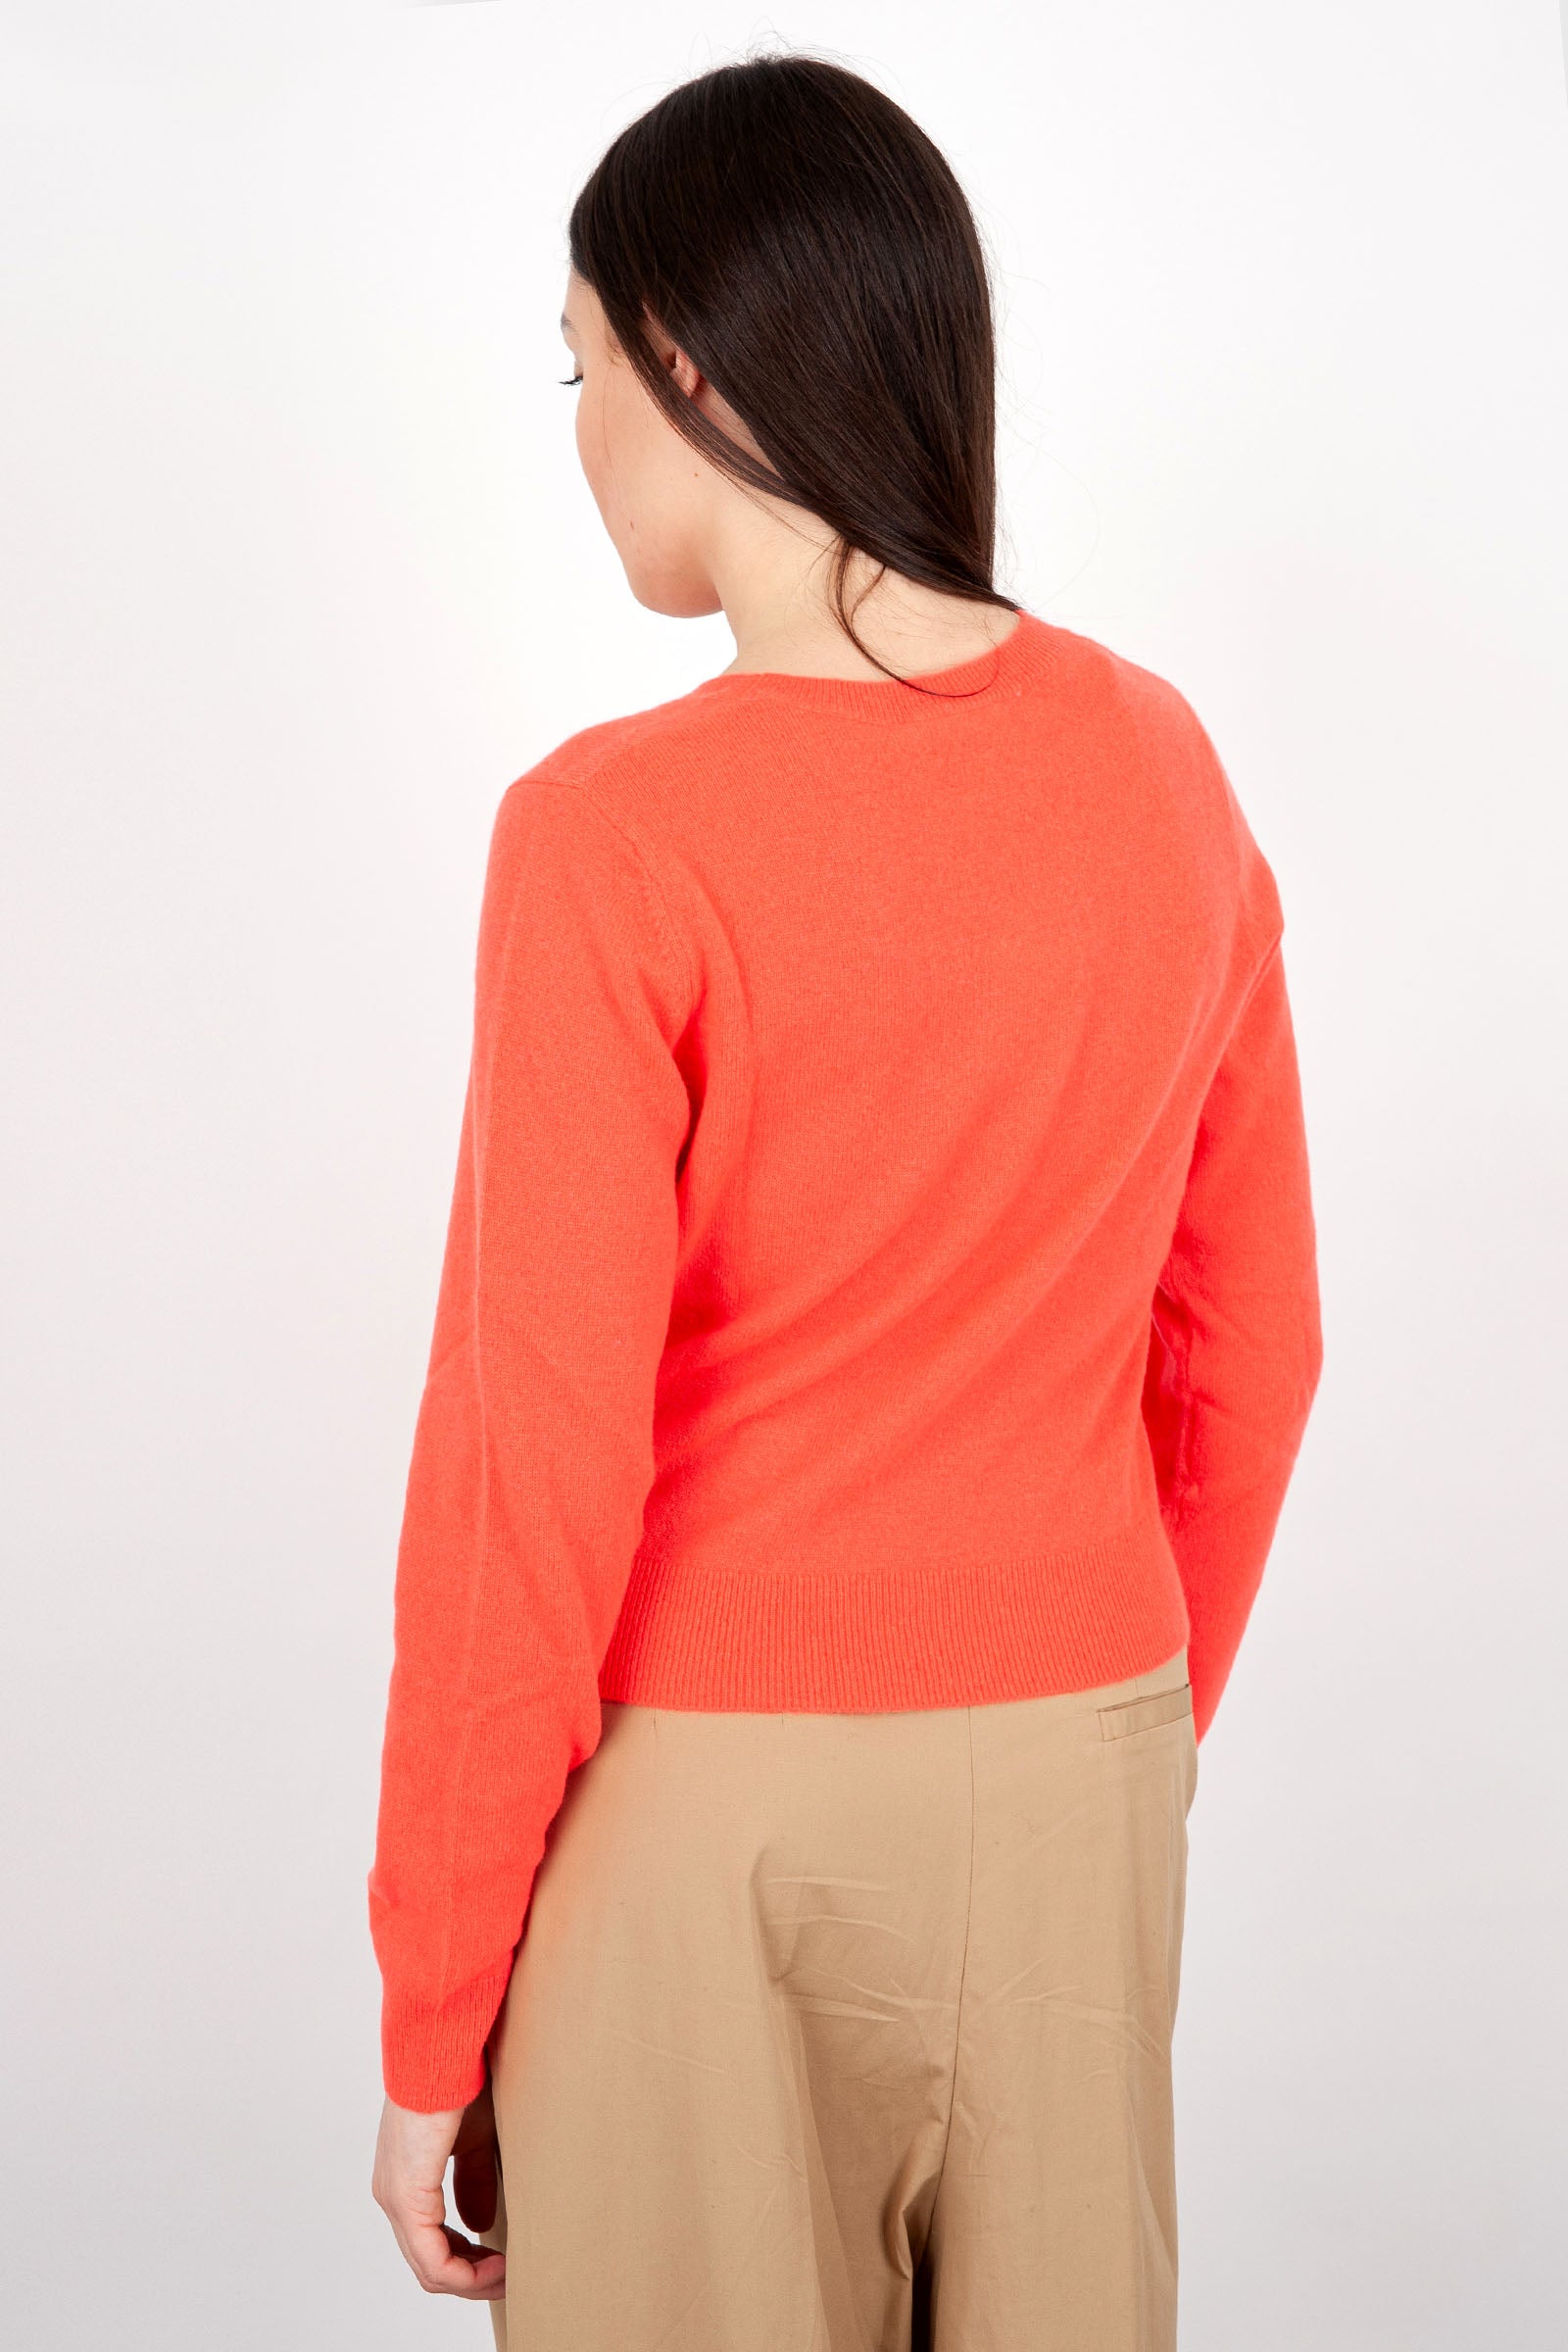 Absolut Cashmere Carlie Crewneck Sweater in Coral Wool - 4